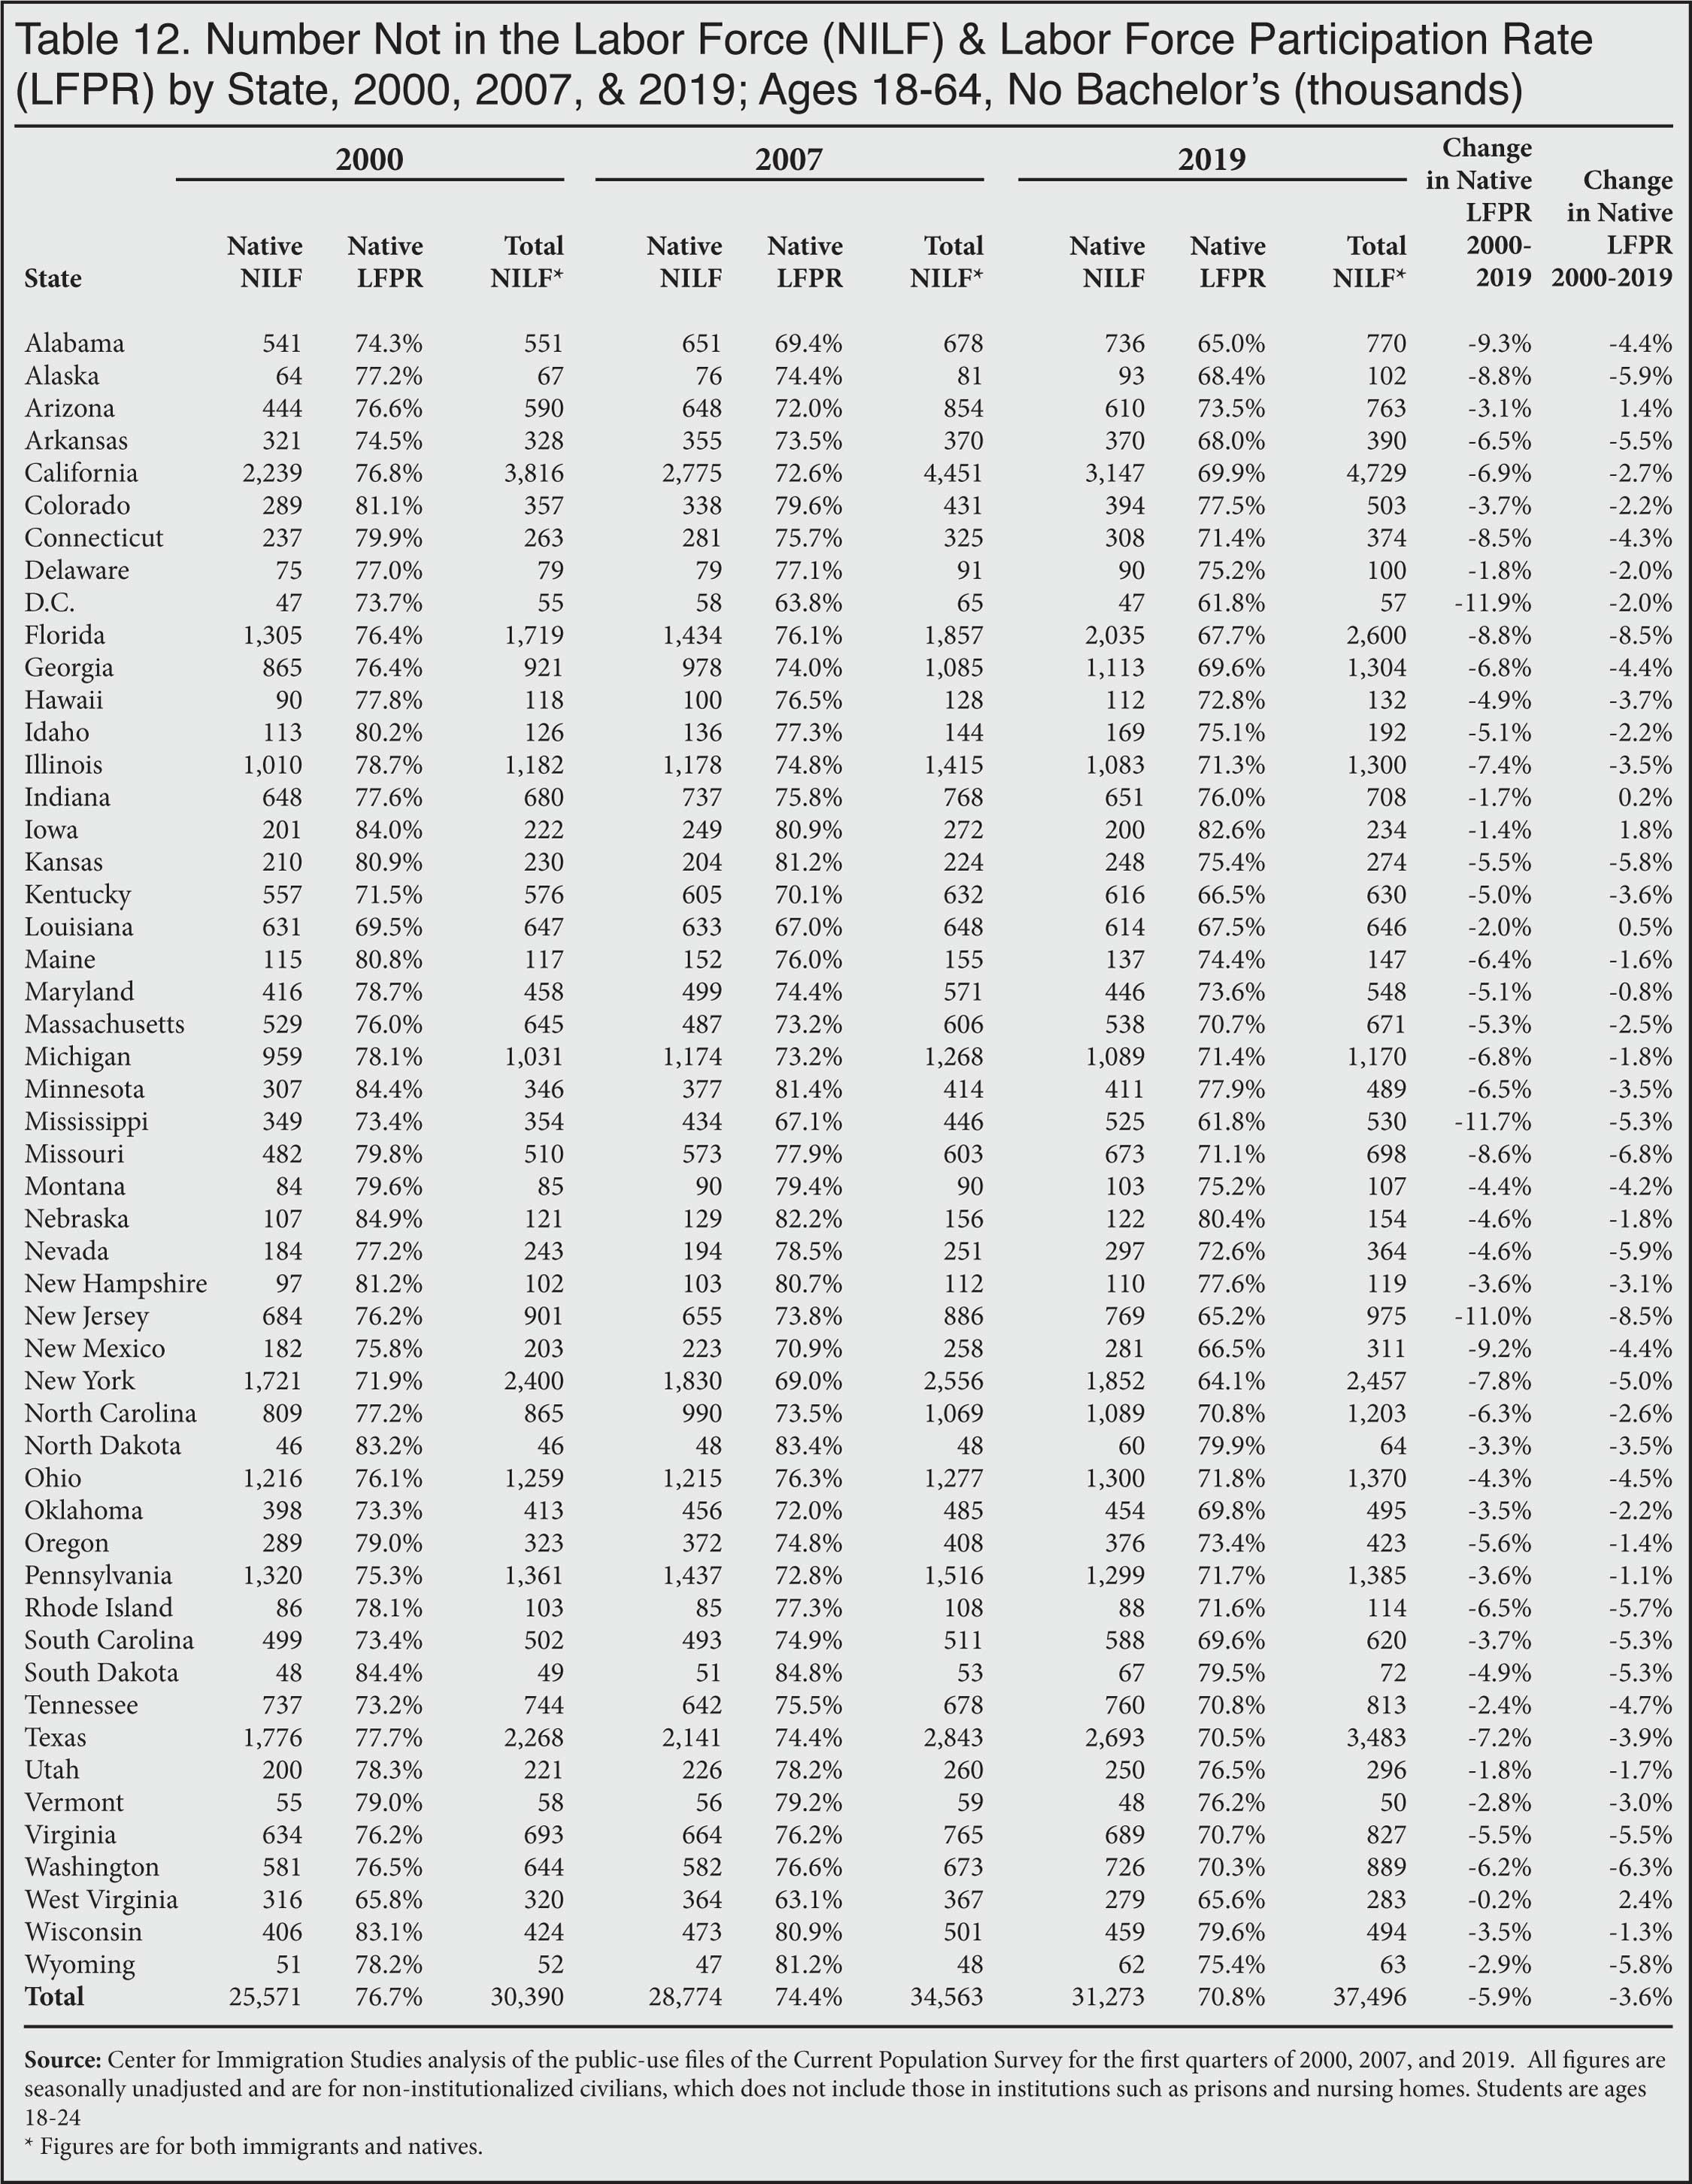 Table: Number not in the Labor Force and Labor Force Participation Rate by State, 2000, 2007, 2019 - No Bachelor's